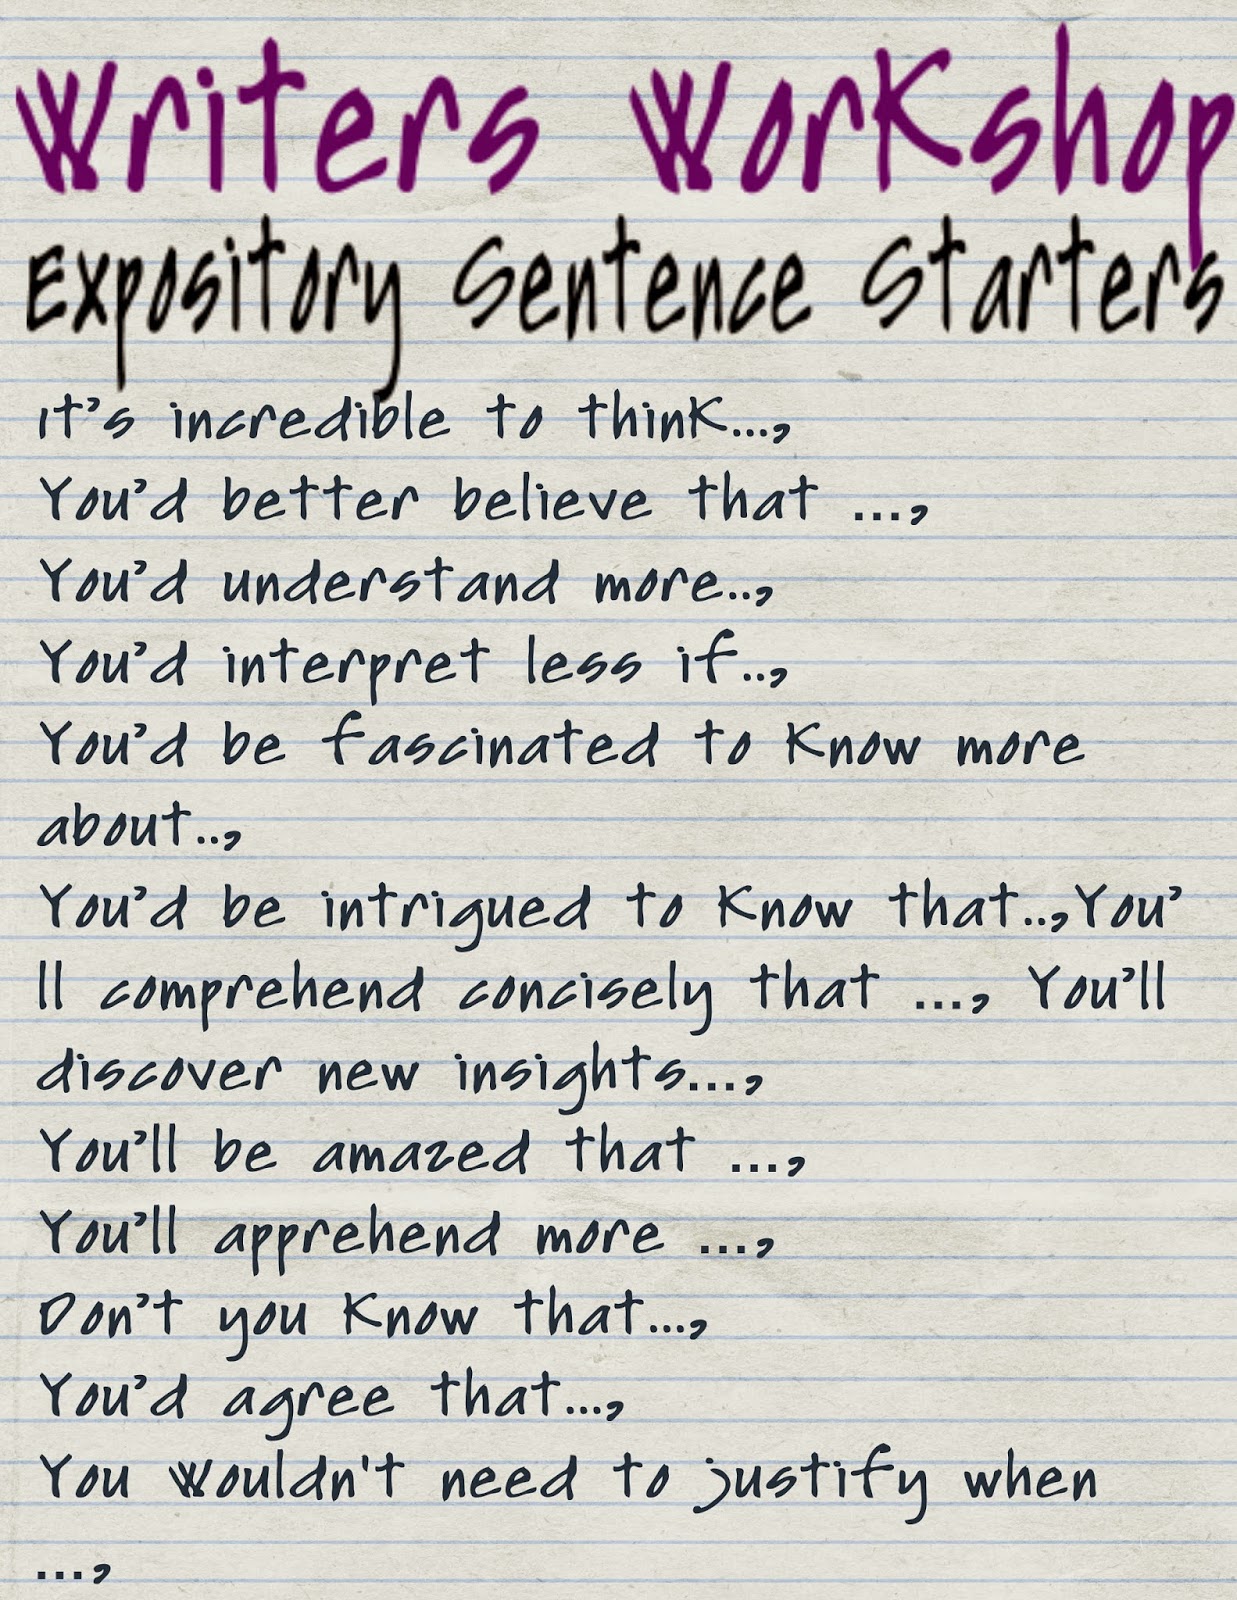 Opinion Writing EBSR with Sentence Starters